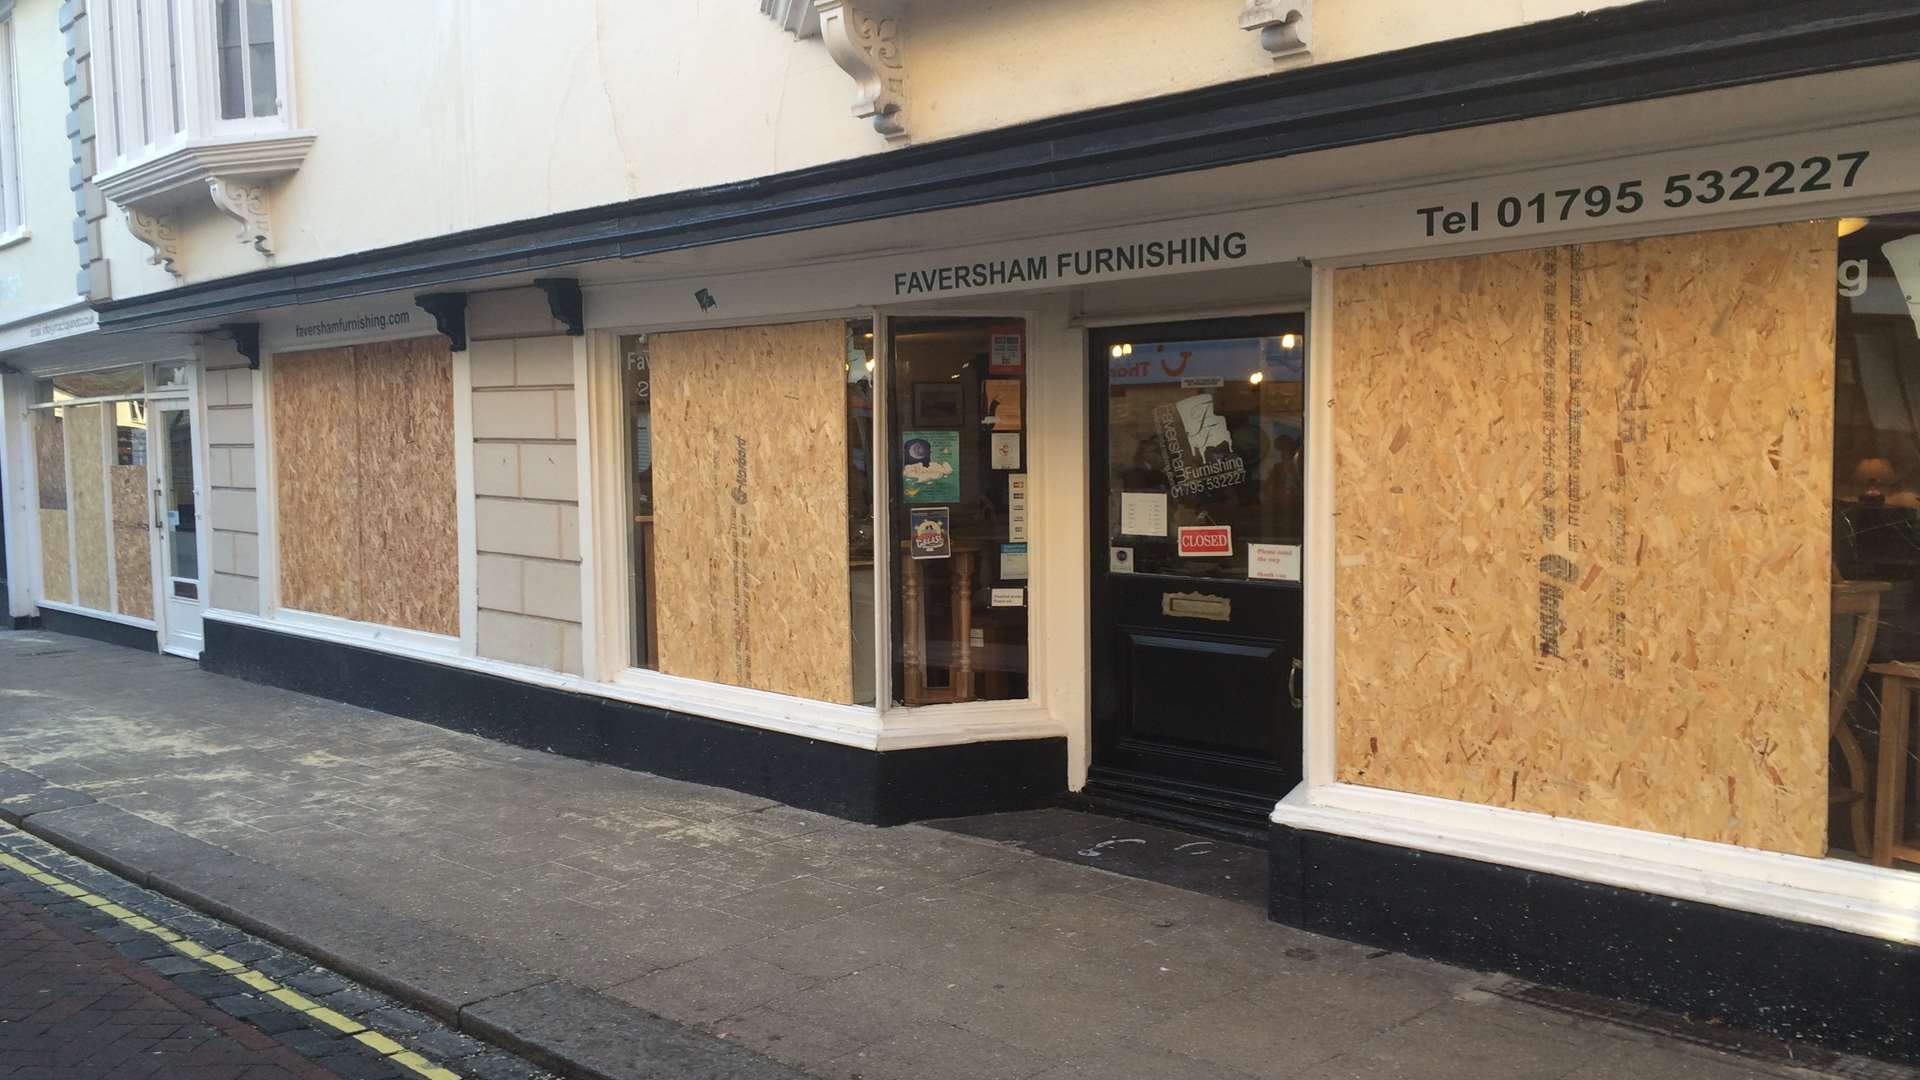 Independent business Faversham Furniture had all of its windows smashed.